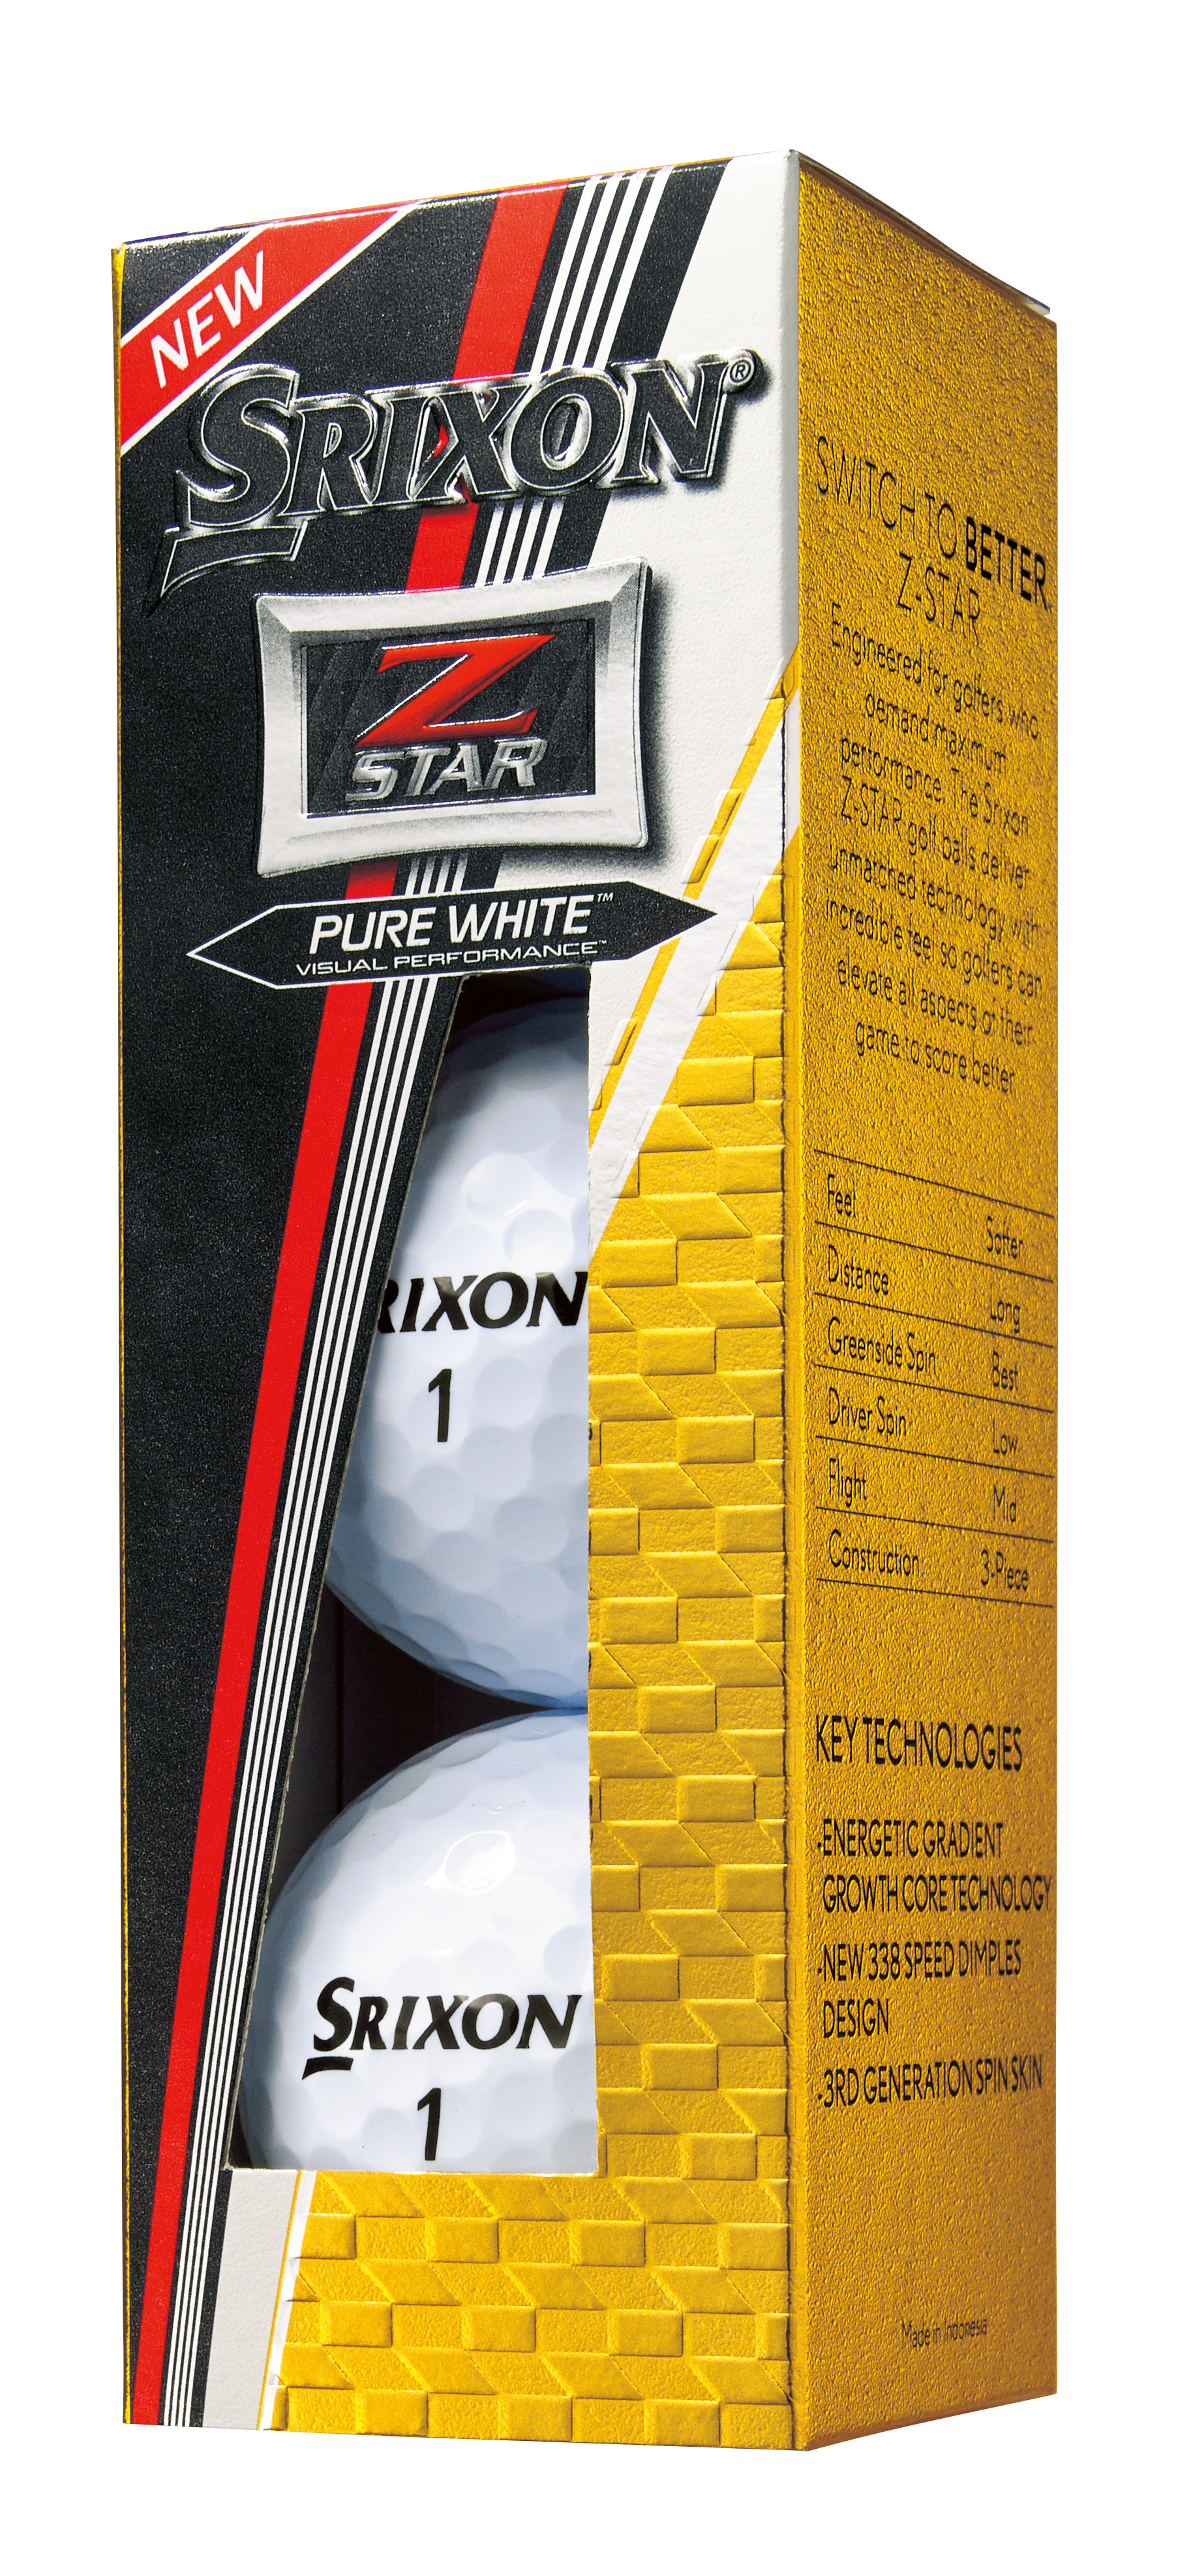 Srixon Z-Star, XV and Q-Star Tour offer three options off the tee 